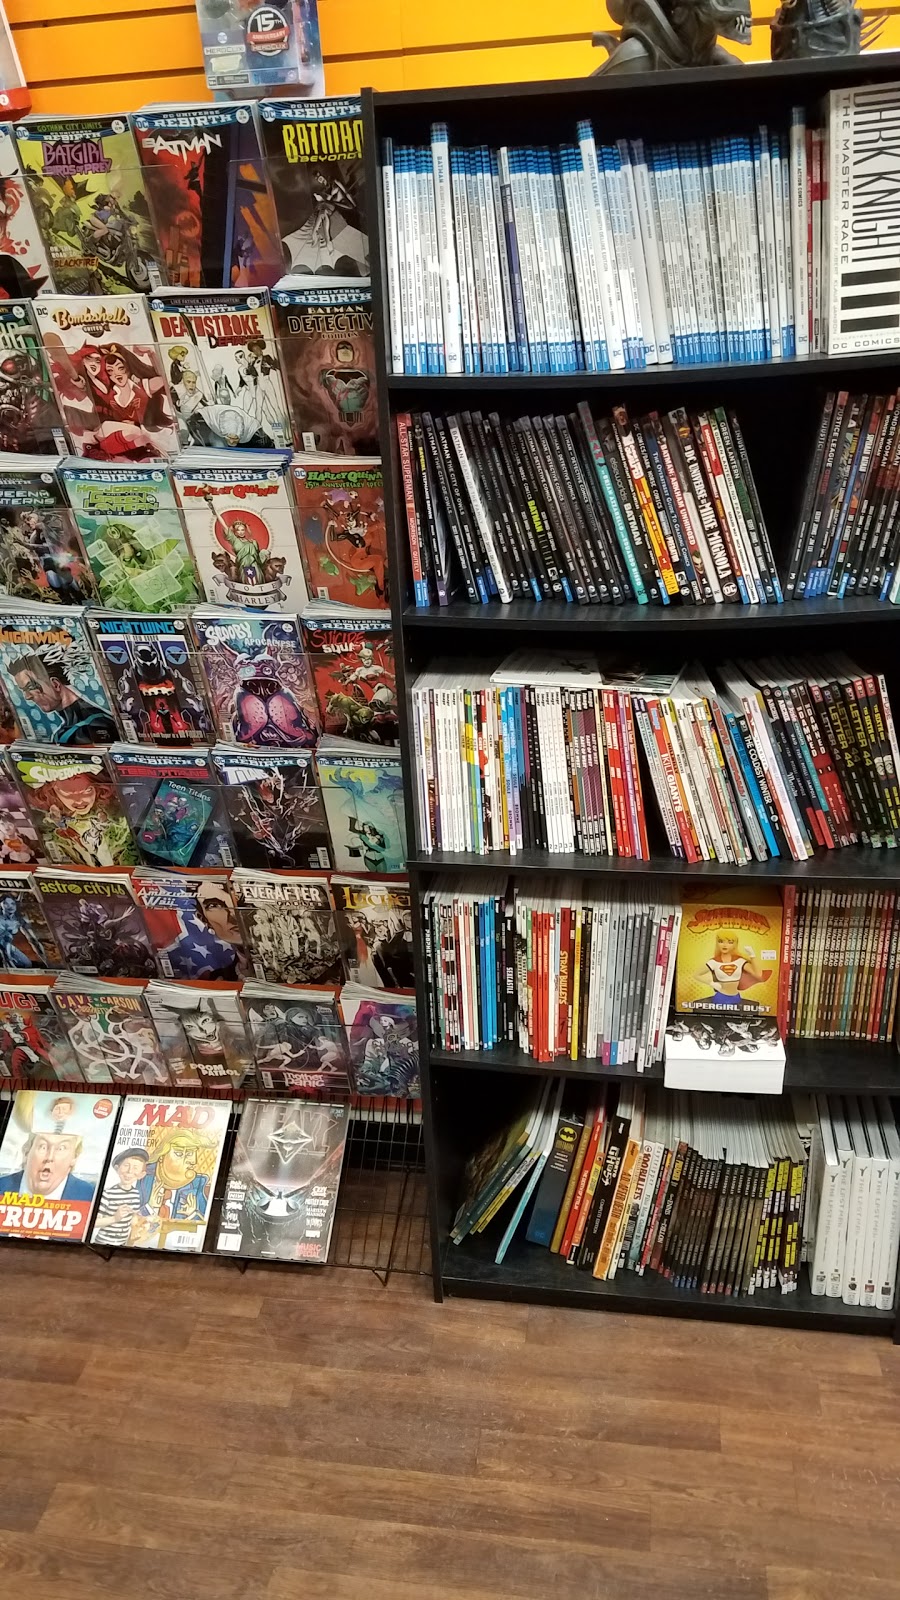 Flying Monkey Comics and Games | 1778 Columbus Pike, Delaware, OH 43015 | Phone: (740) 990-1066